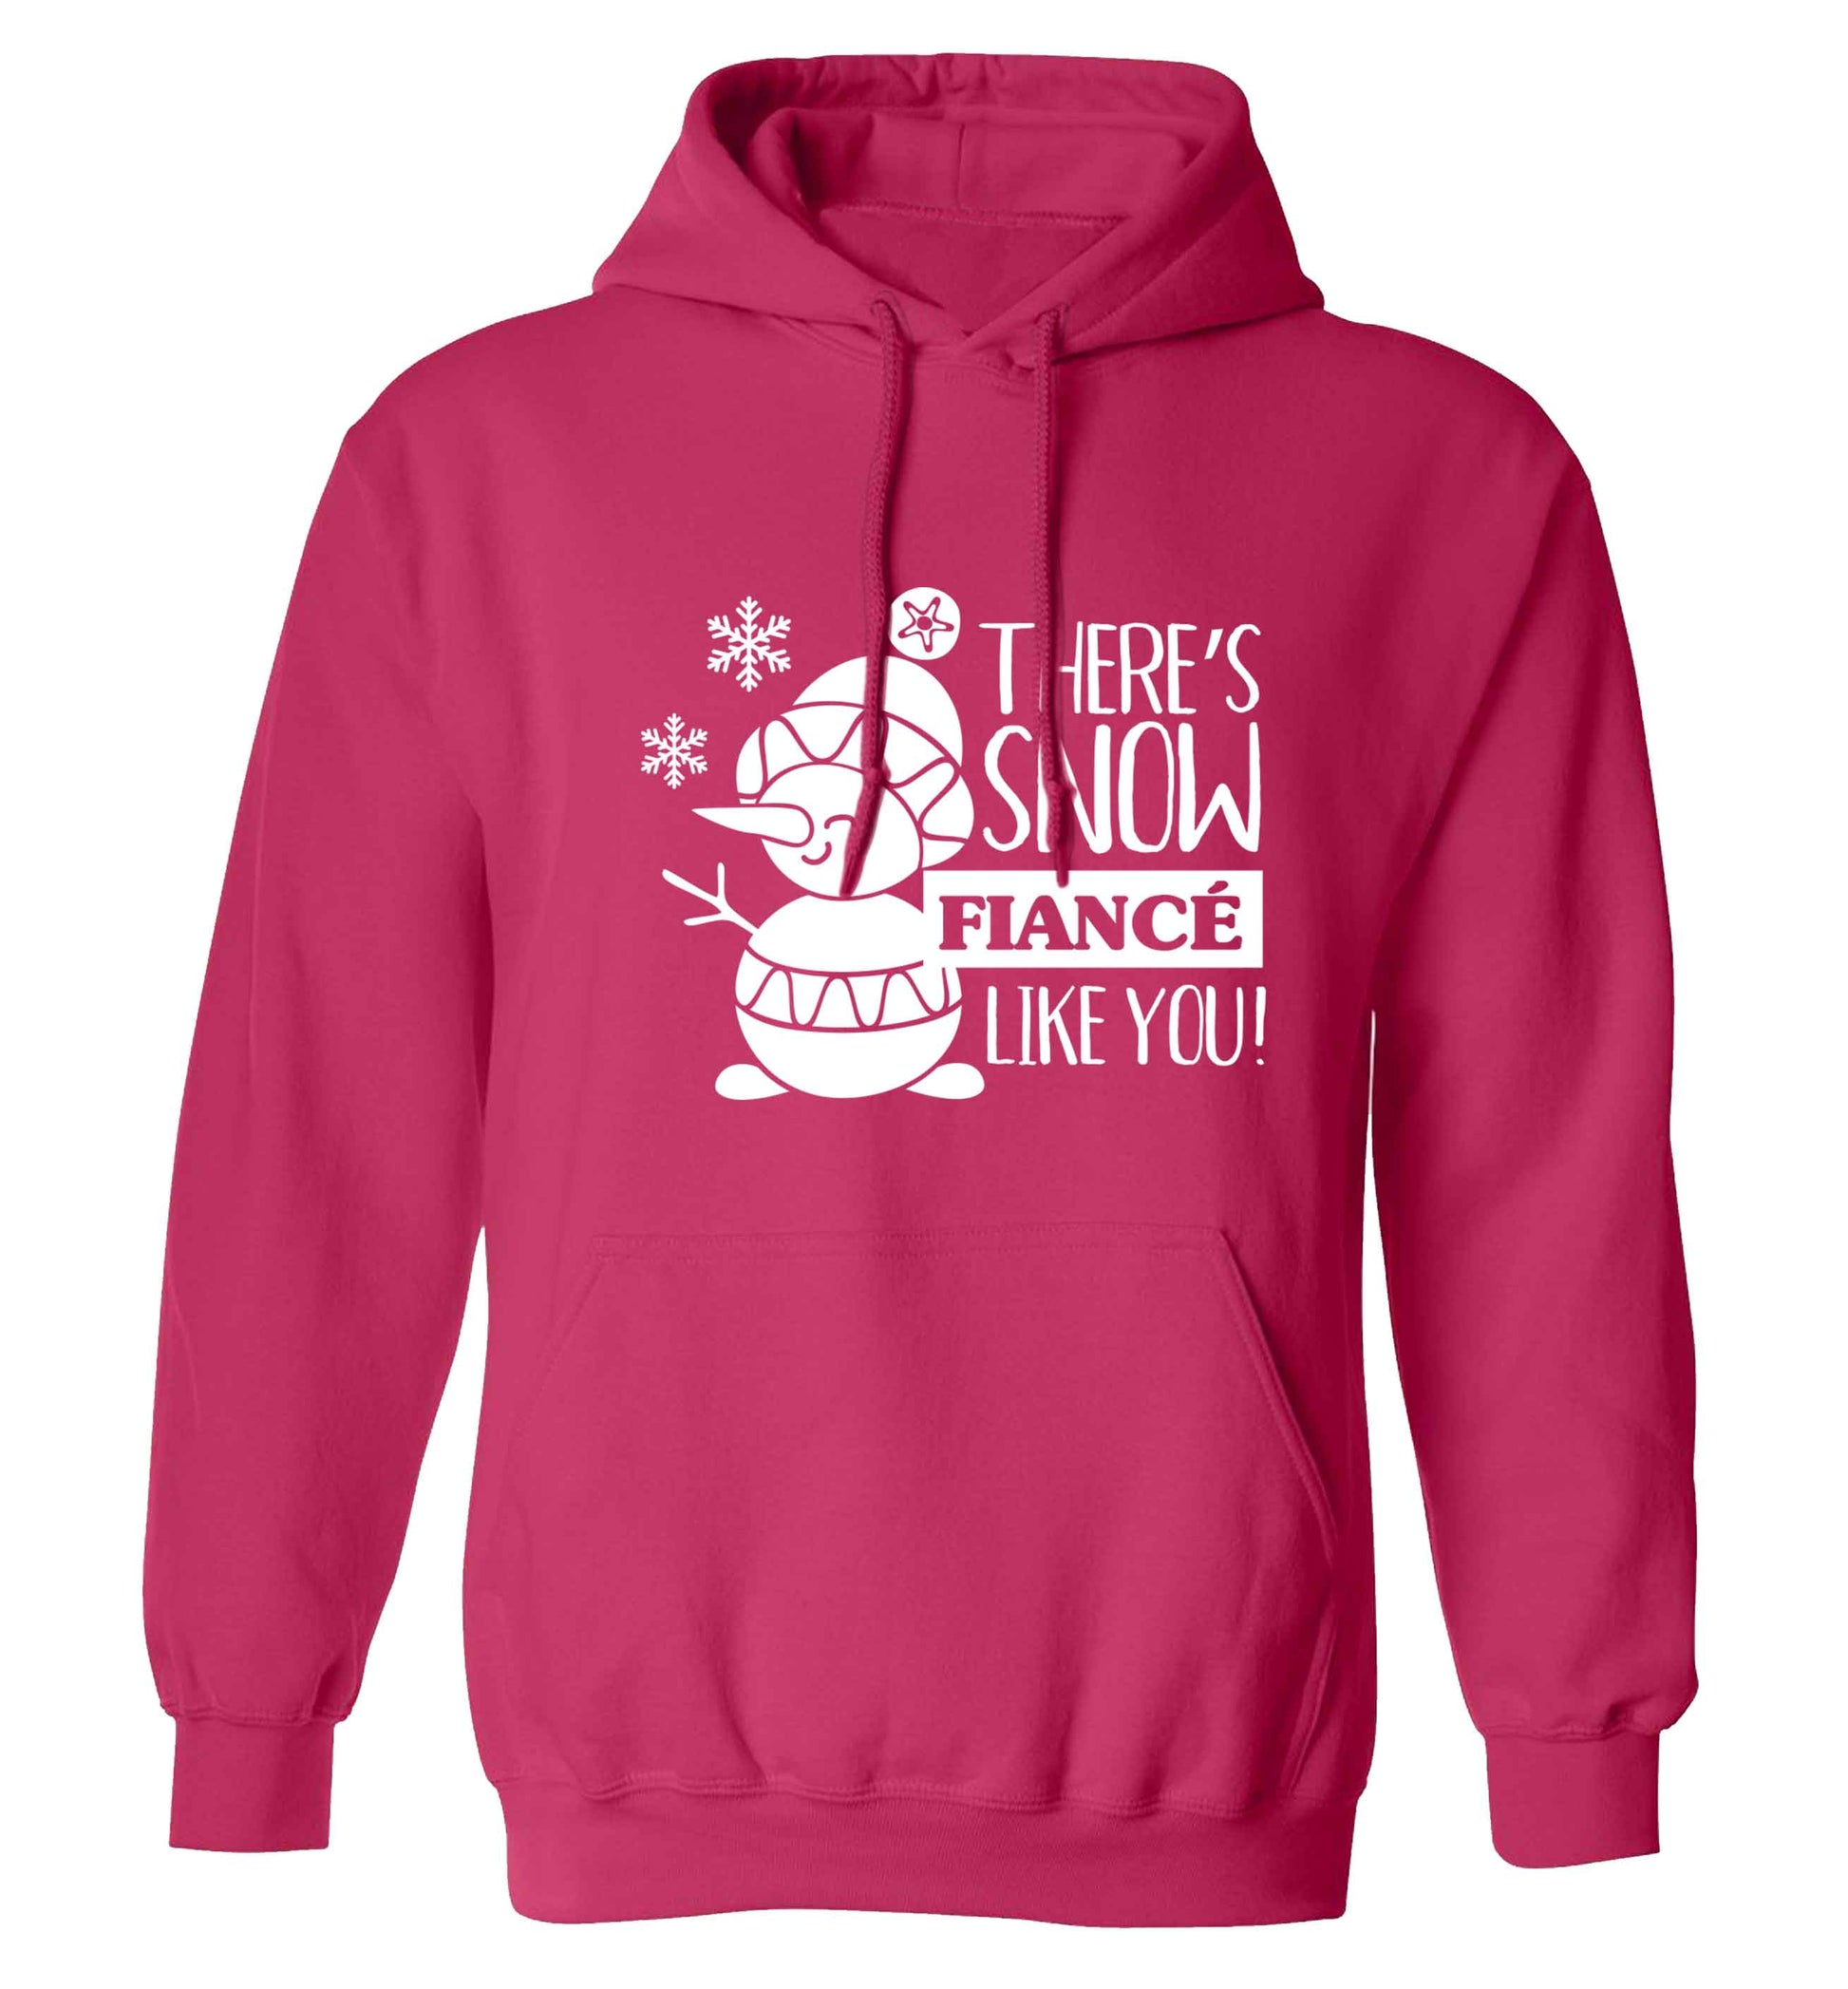 There's snow fiance like you adults unisex pink hoodie 2XL